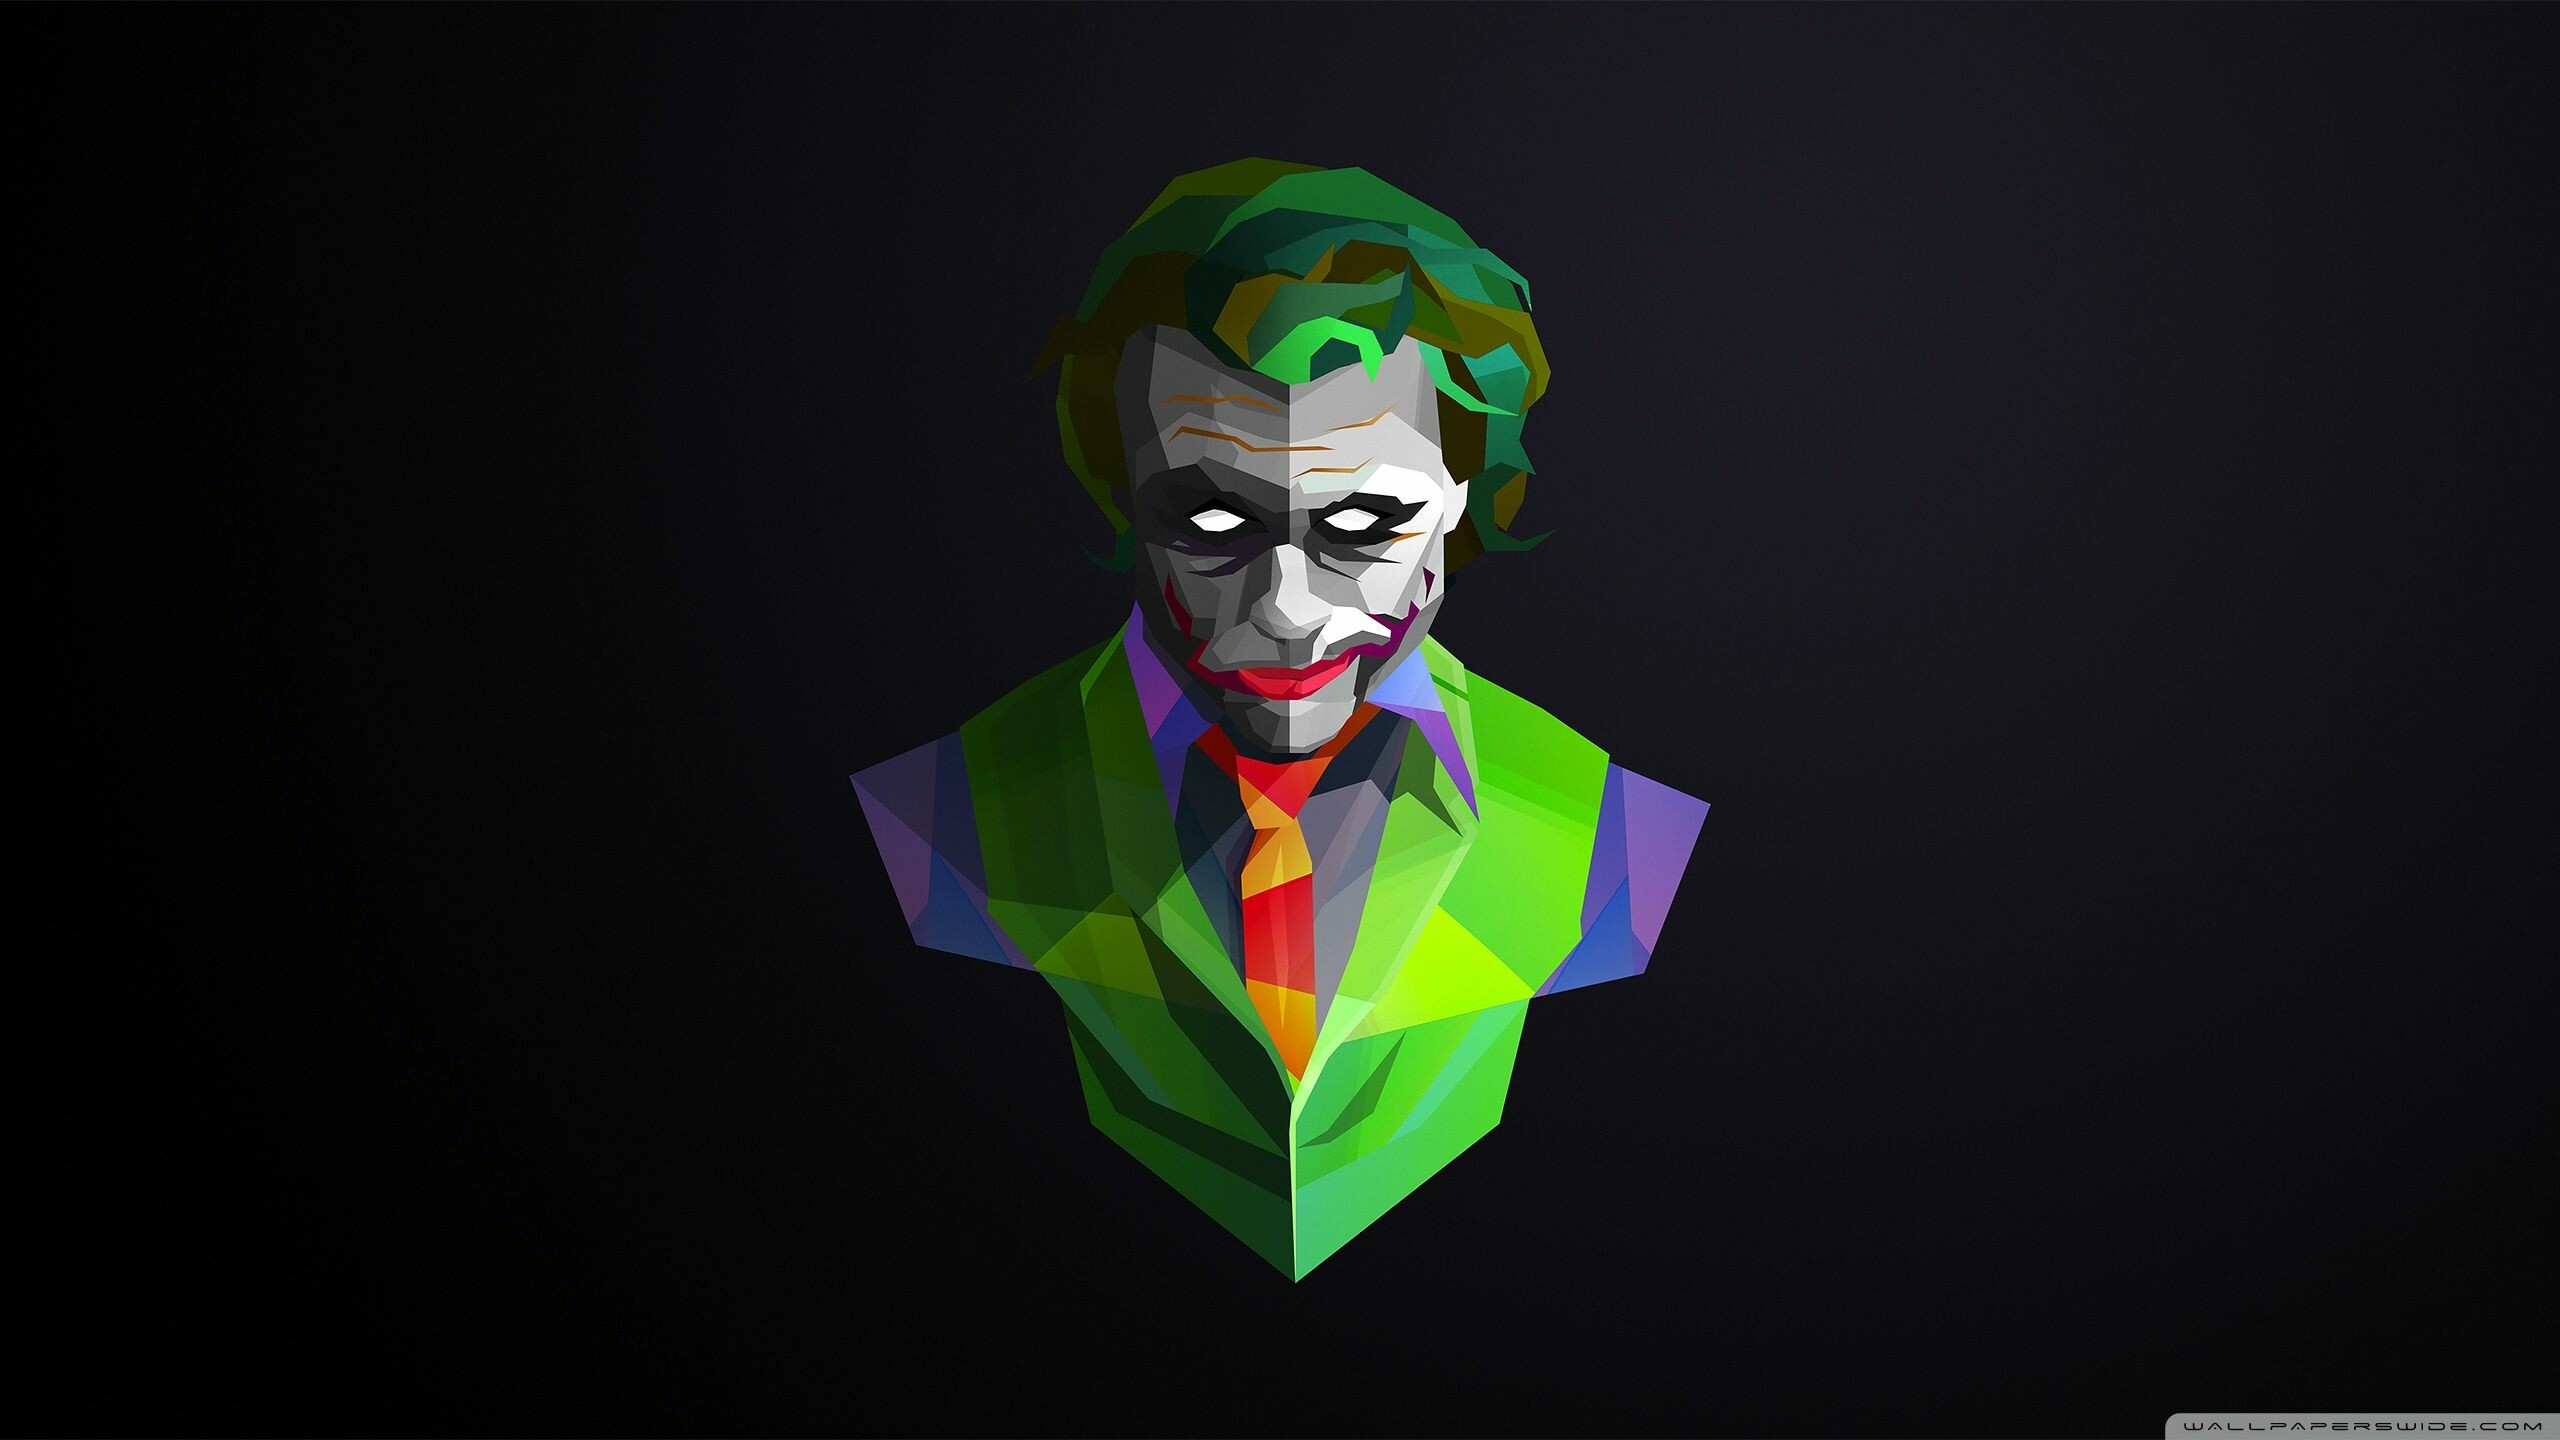 Joker Wallpaper: HD, 4K, 5K for PC and Mobile. Download free image for iPhone, Android